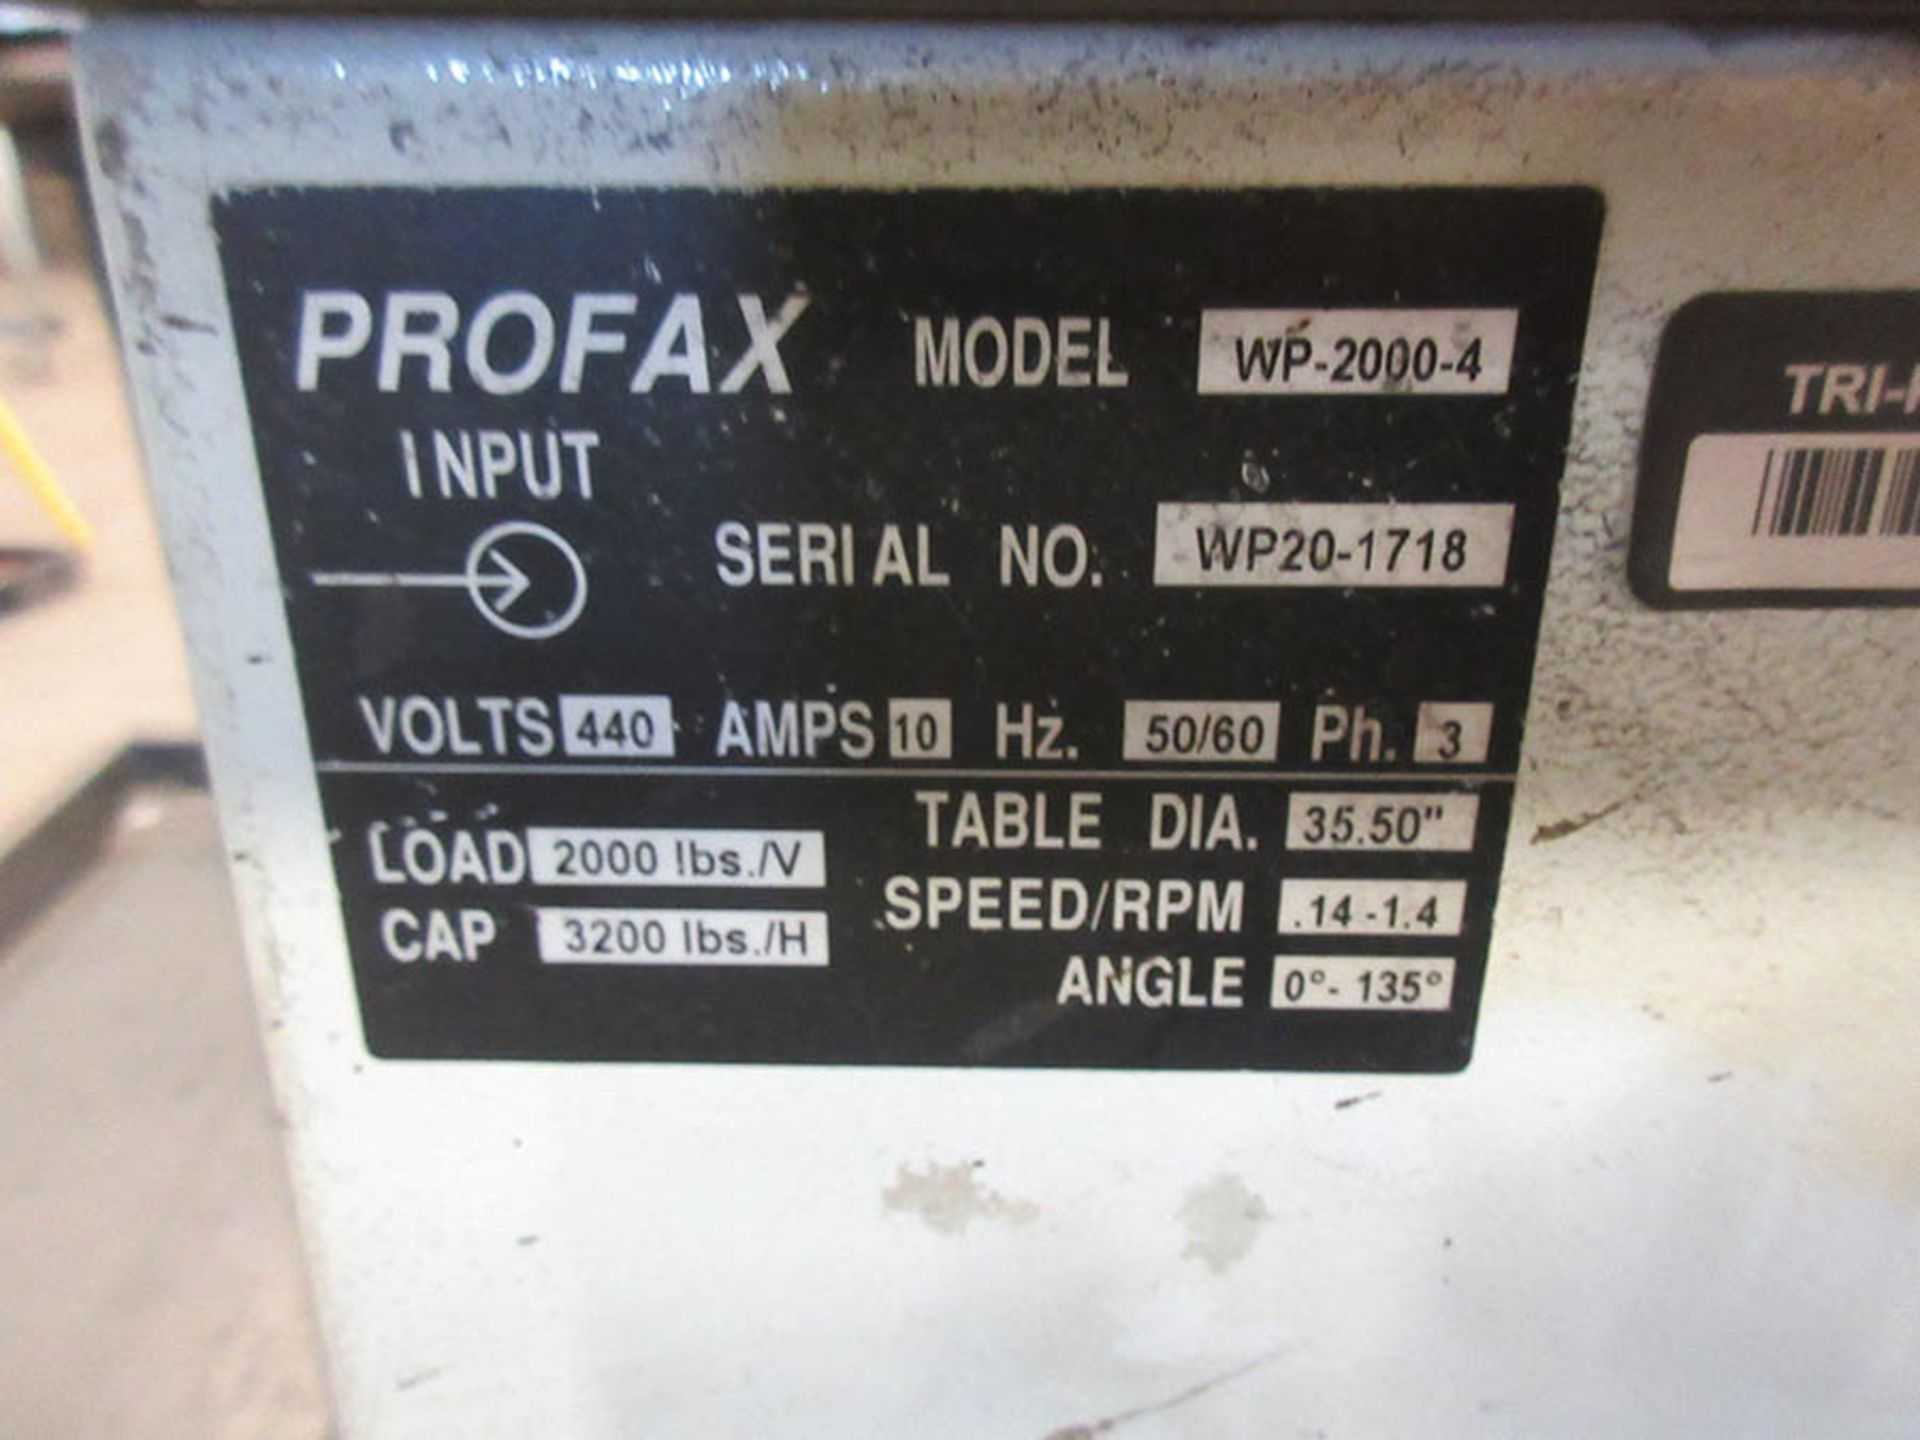 PROFAX WELDING POSITIONER, MODEL: WP-2000-4, LOAD 2000 LBS./V, CAP 3200 LBS./H, TABLE DIA. 35. - Image 4 of 4